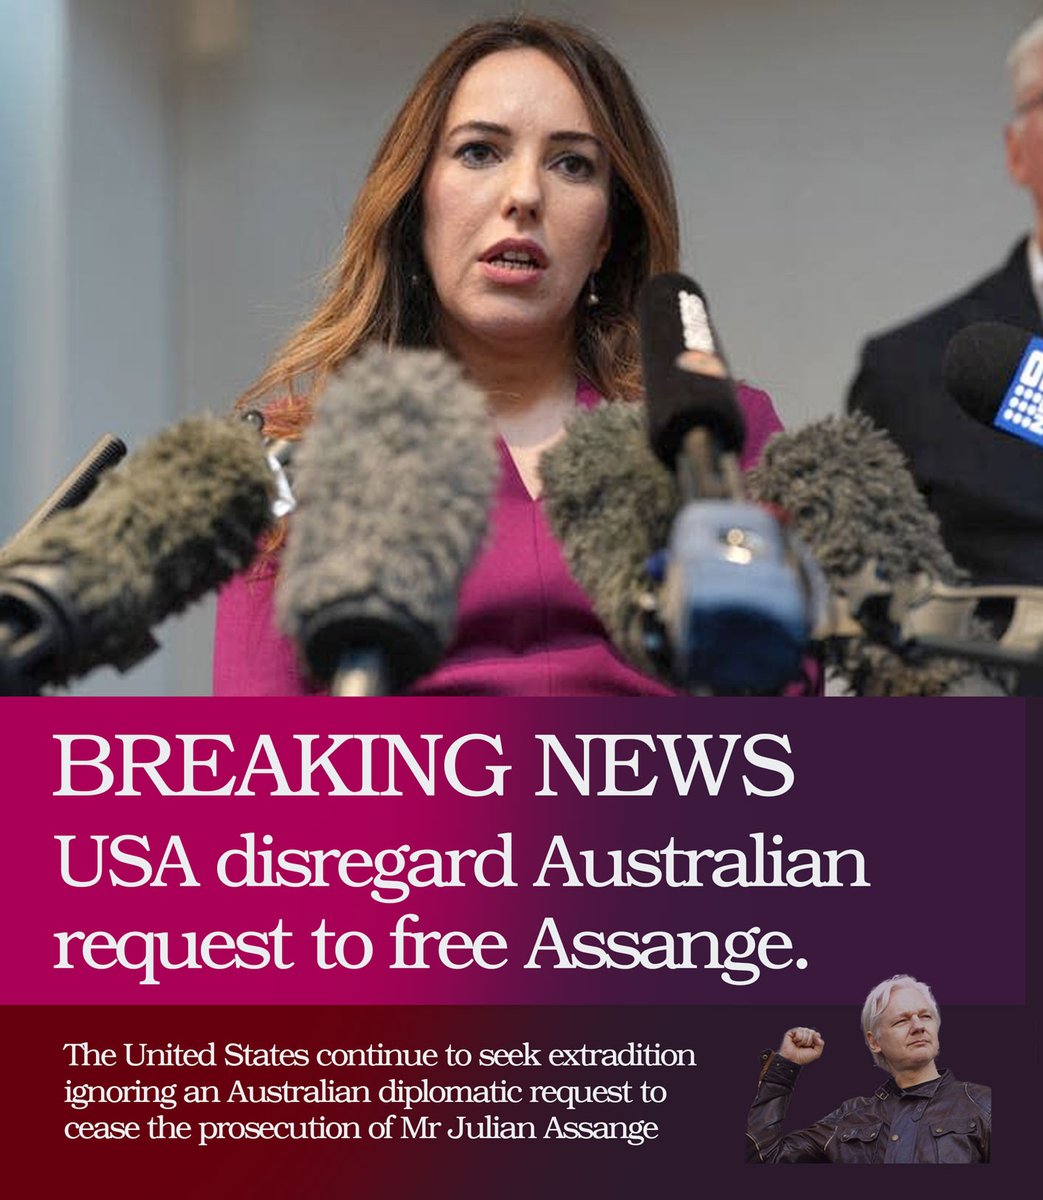 BREAKING NEWS USA continue to seek extradition in UK courts despite repeated Australian diplomatic requests to cease prosecution and release Mr Julian Assange.